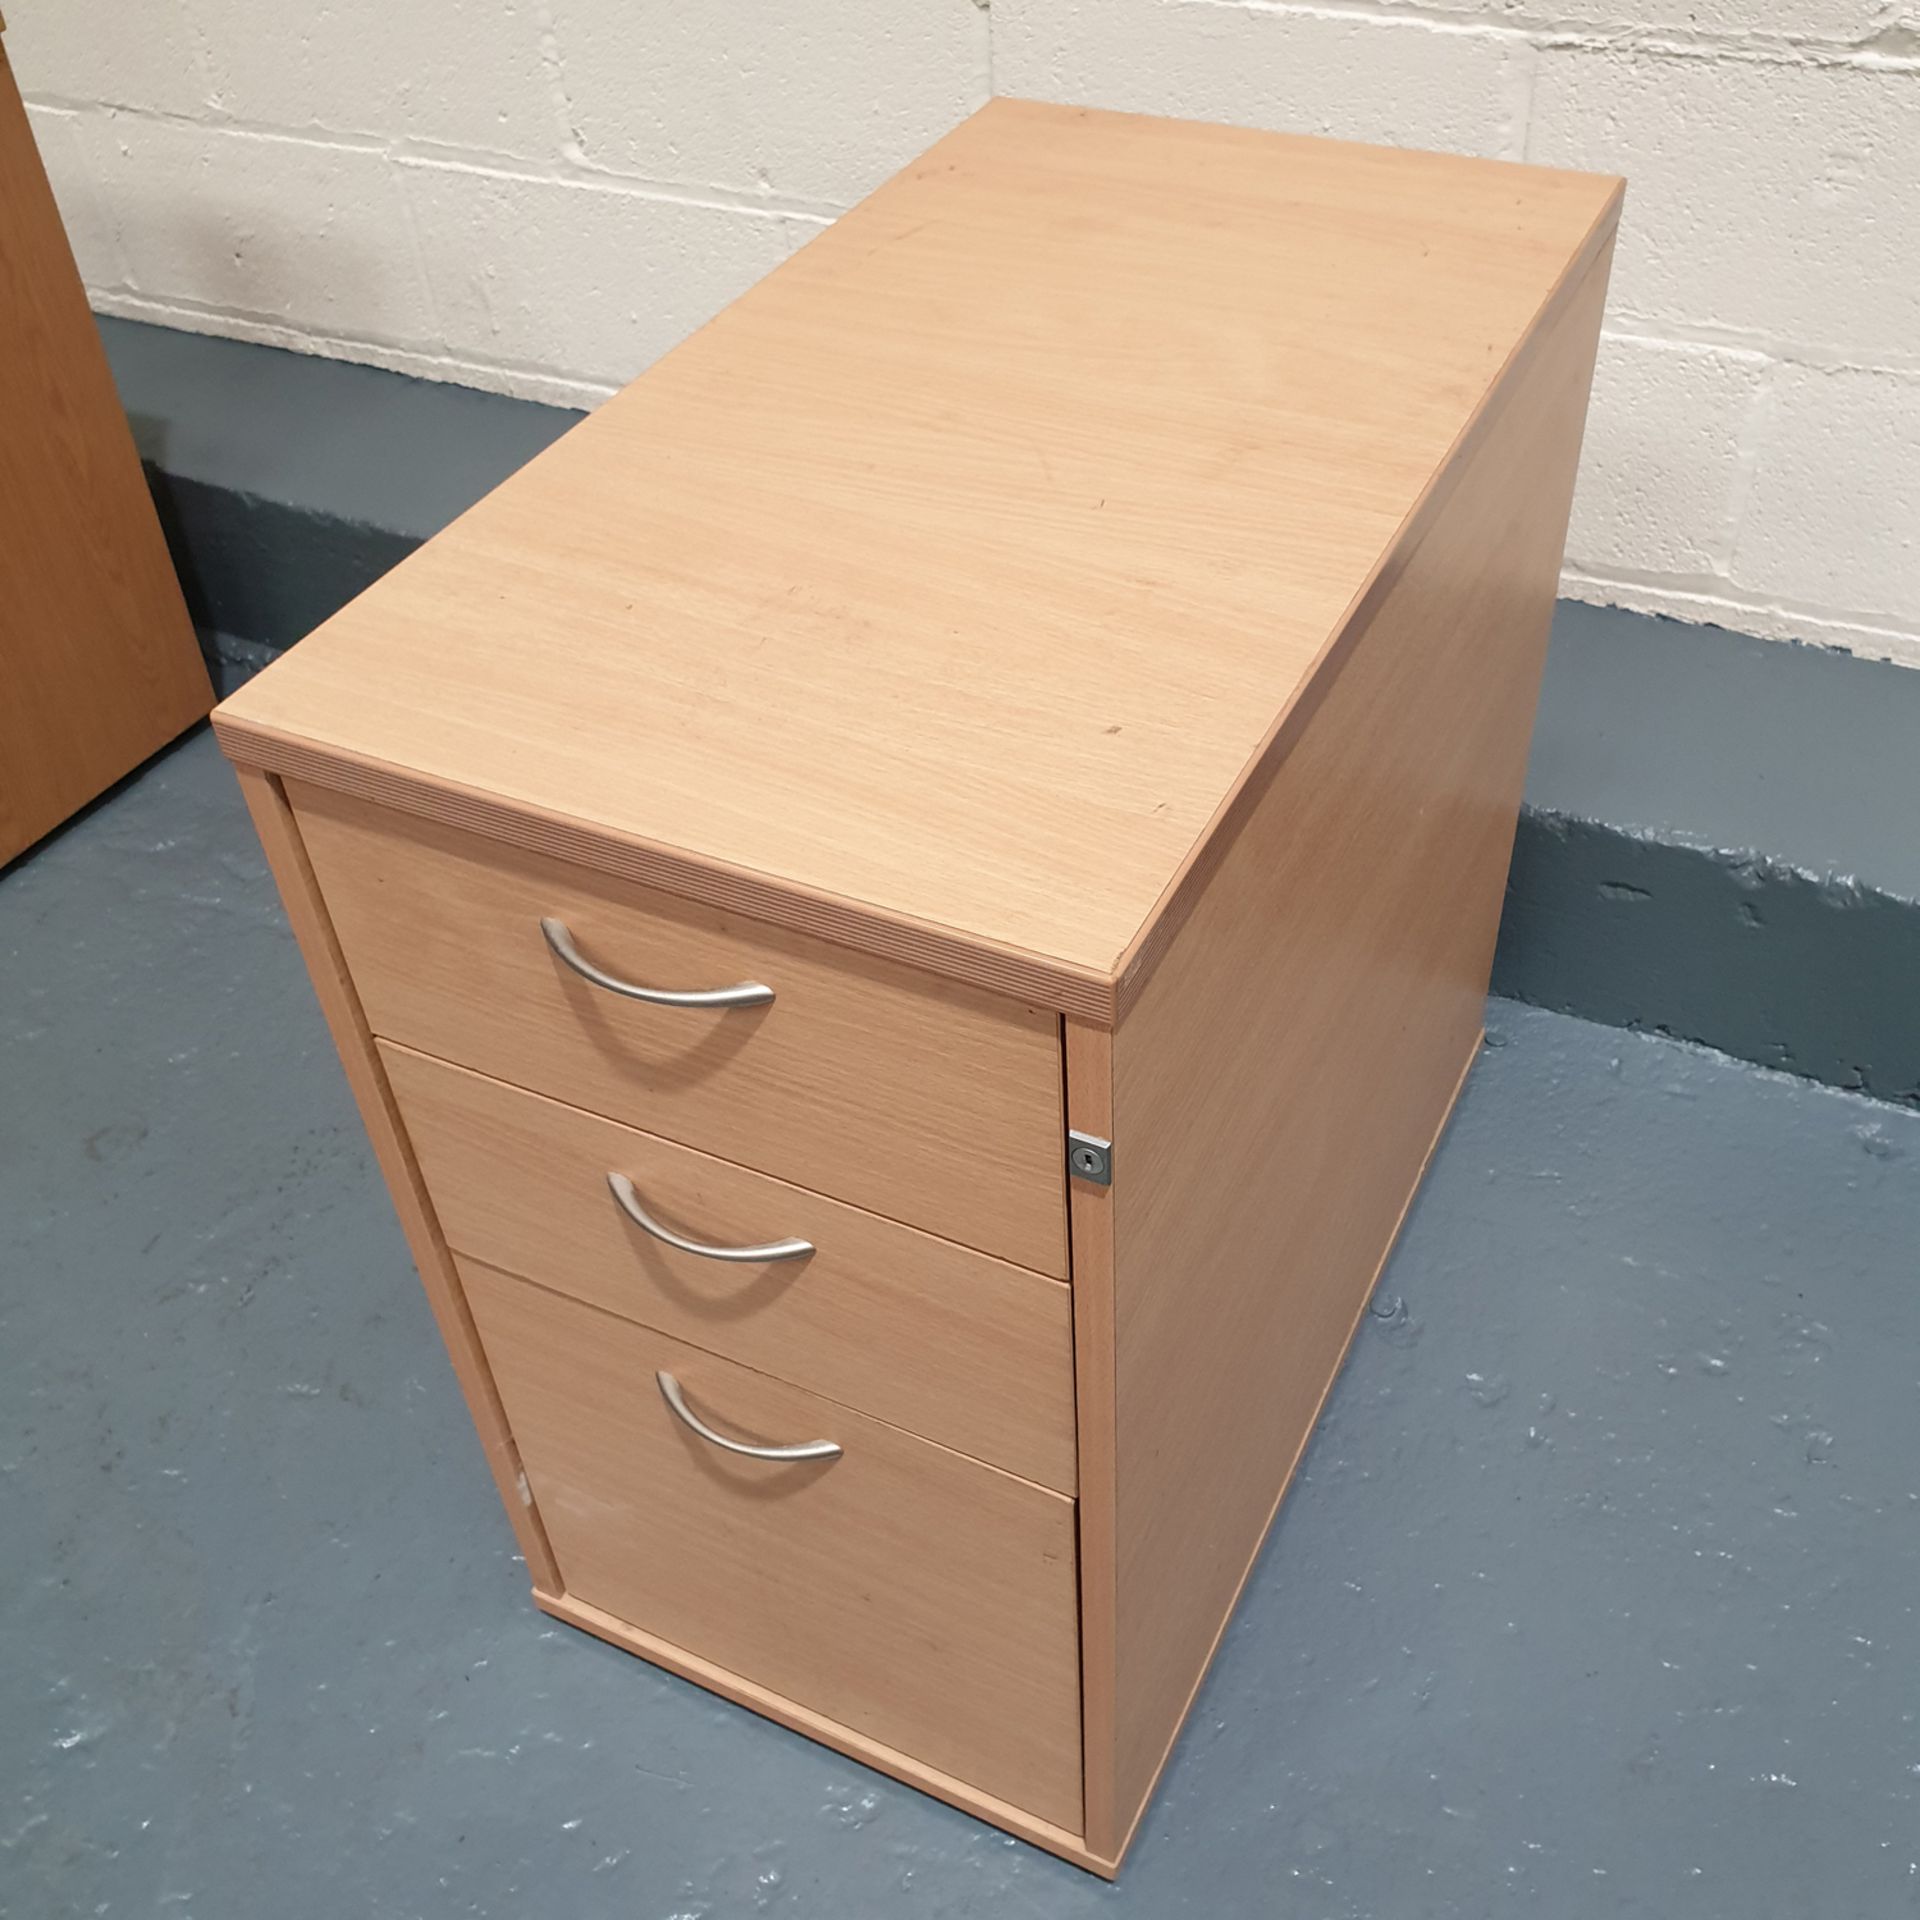 Chest of Drawers. No Key. Approx Dimensions 410mm x 750mm x 730mm High. - Image 3 of 4